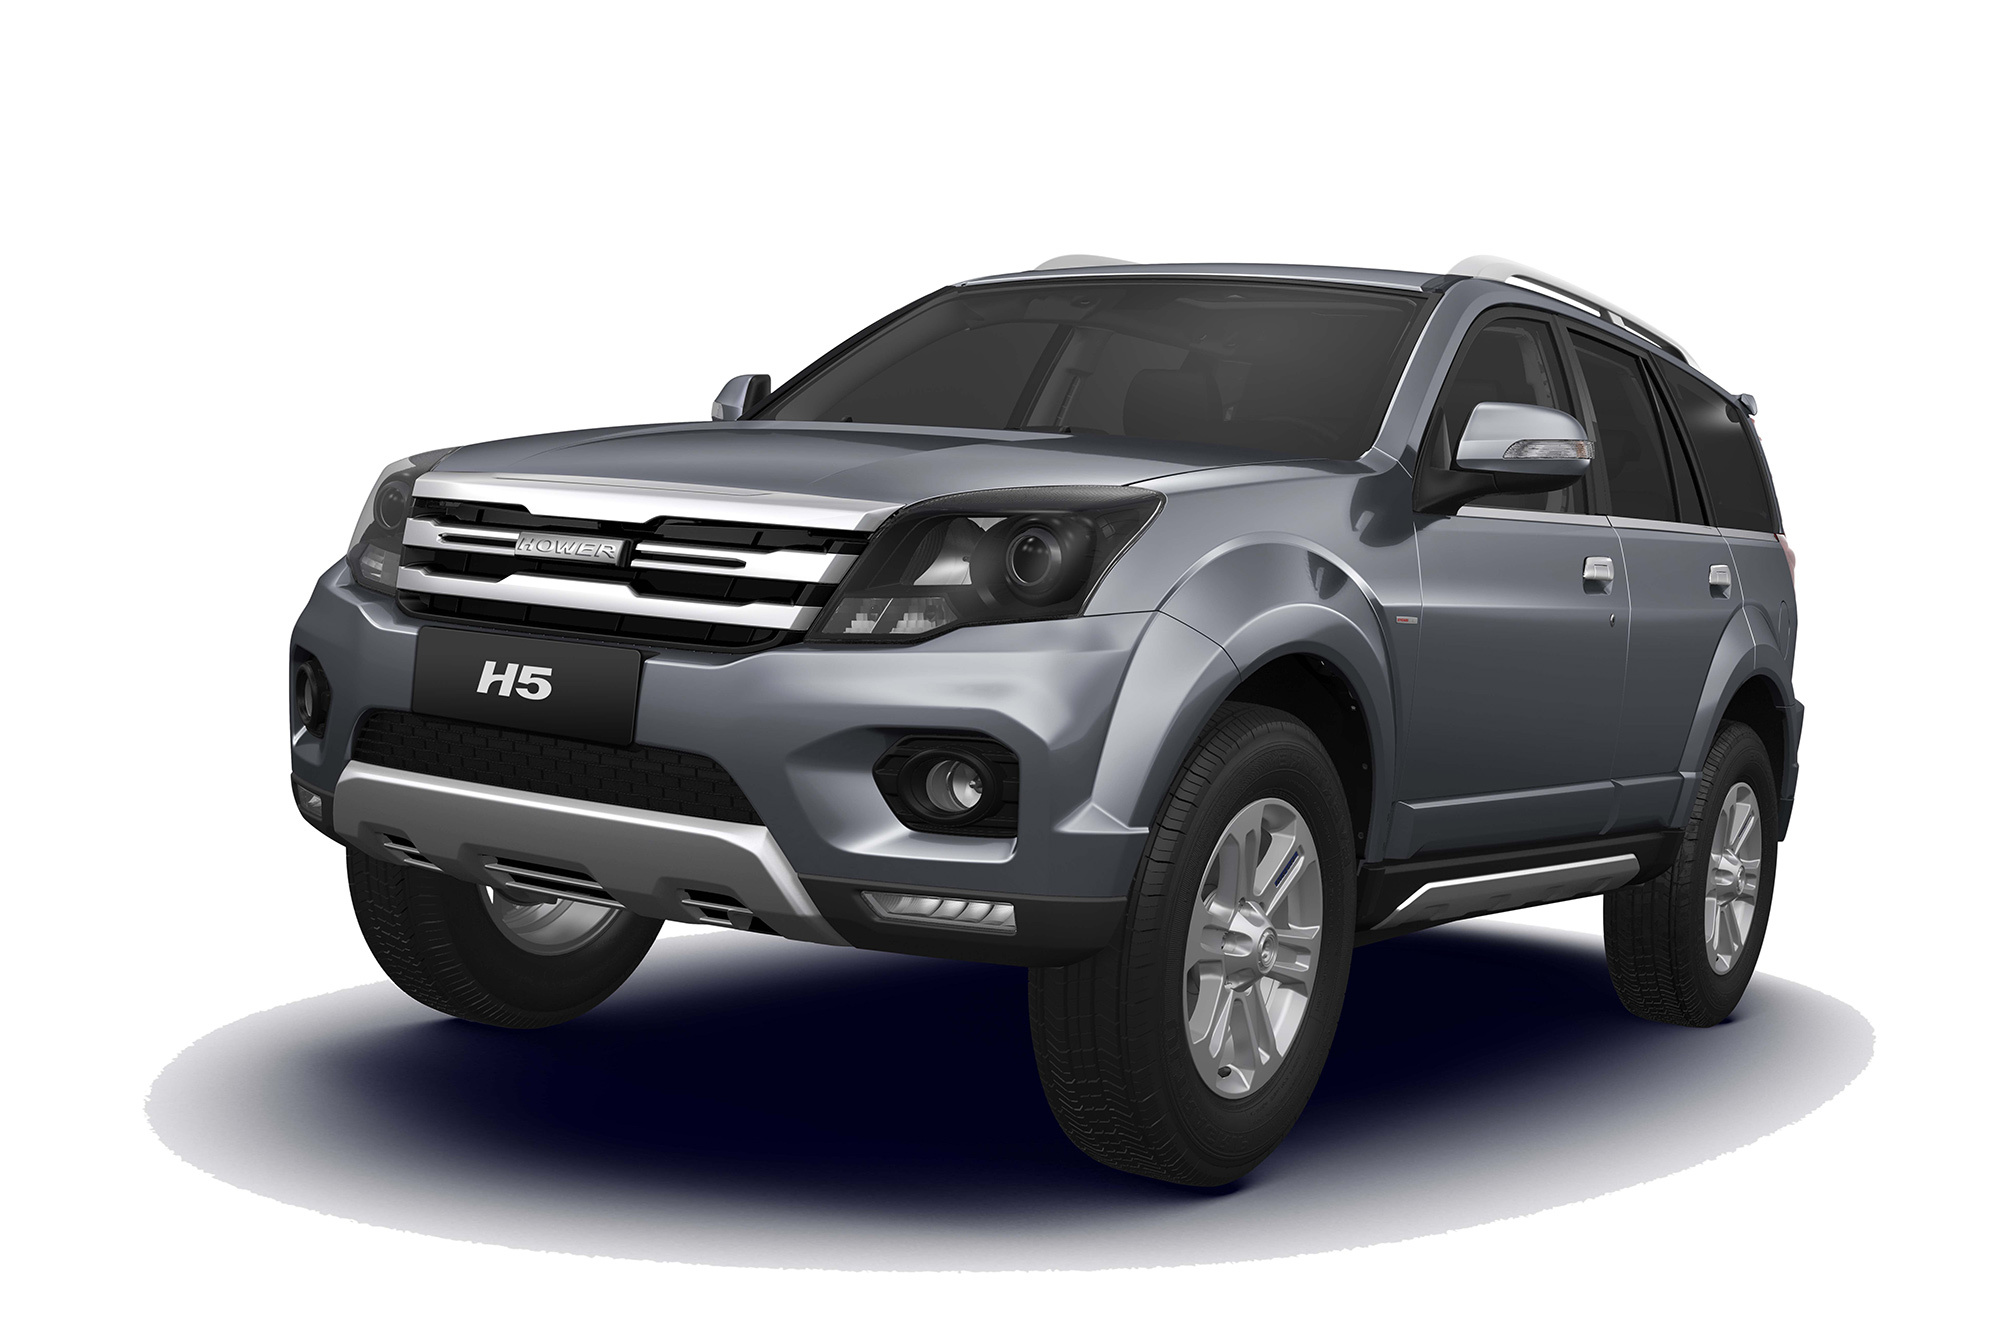 Haval hover. DW Hover h5. DW Hover h5 2021. Ховер н5 2020. Great Wall Haval h5.